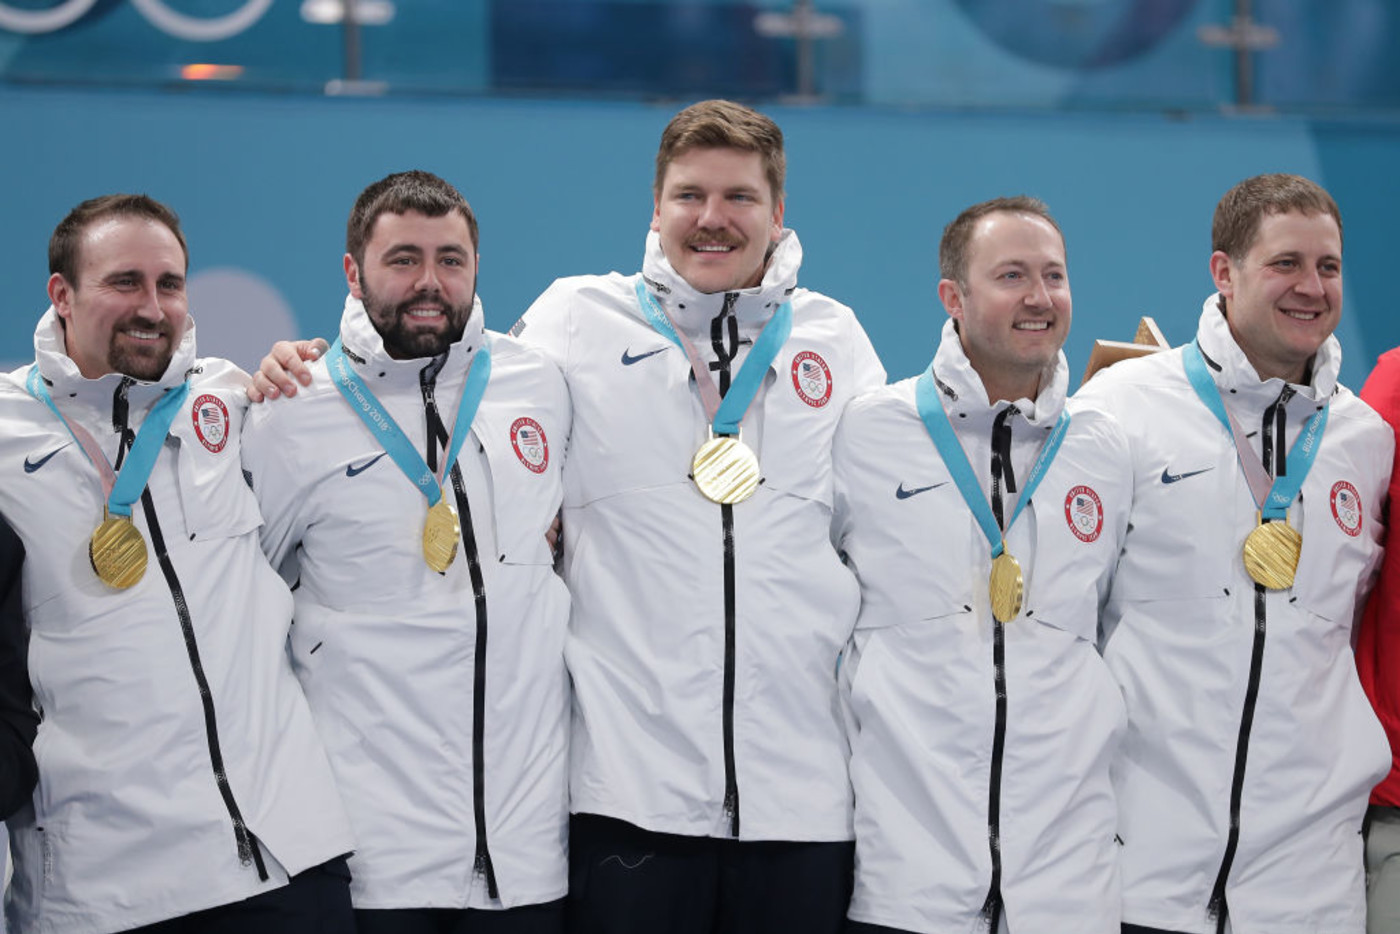 U.S. Men’s Curling Team Given the Wrong Medals at Winter Olympics Medal Ceremony | Complex